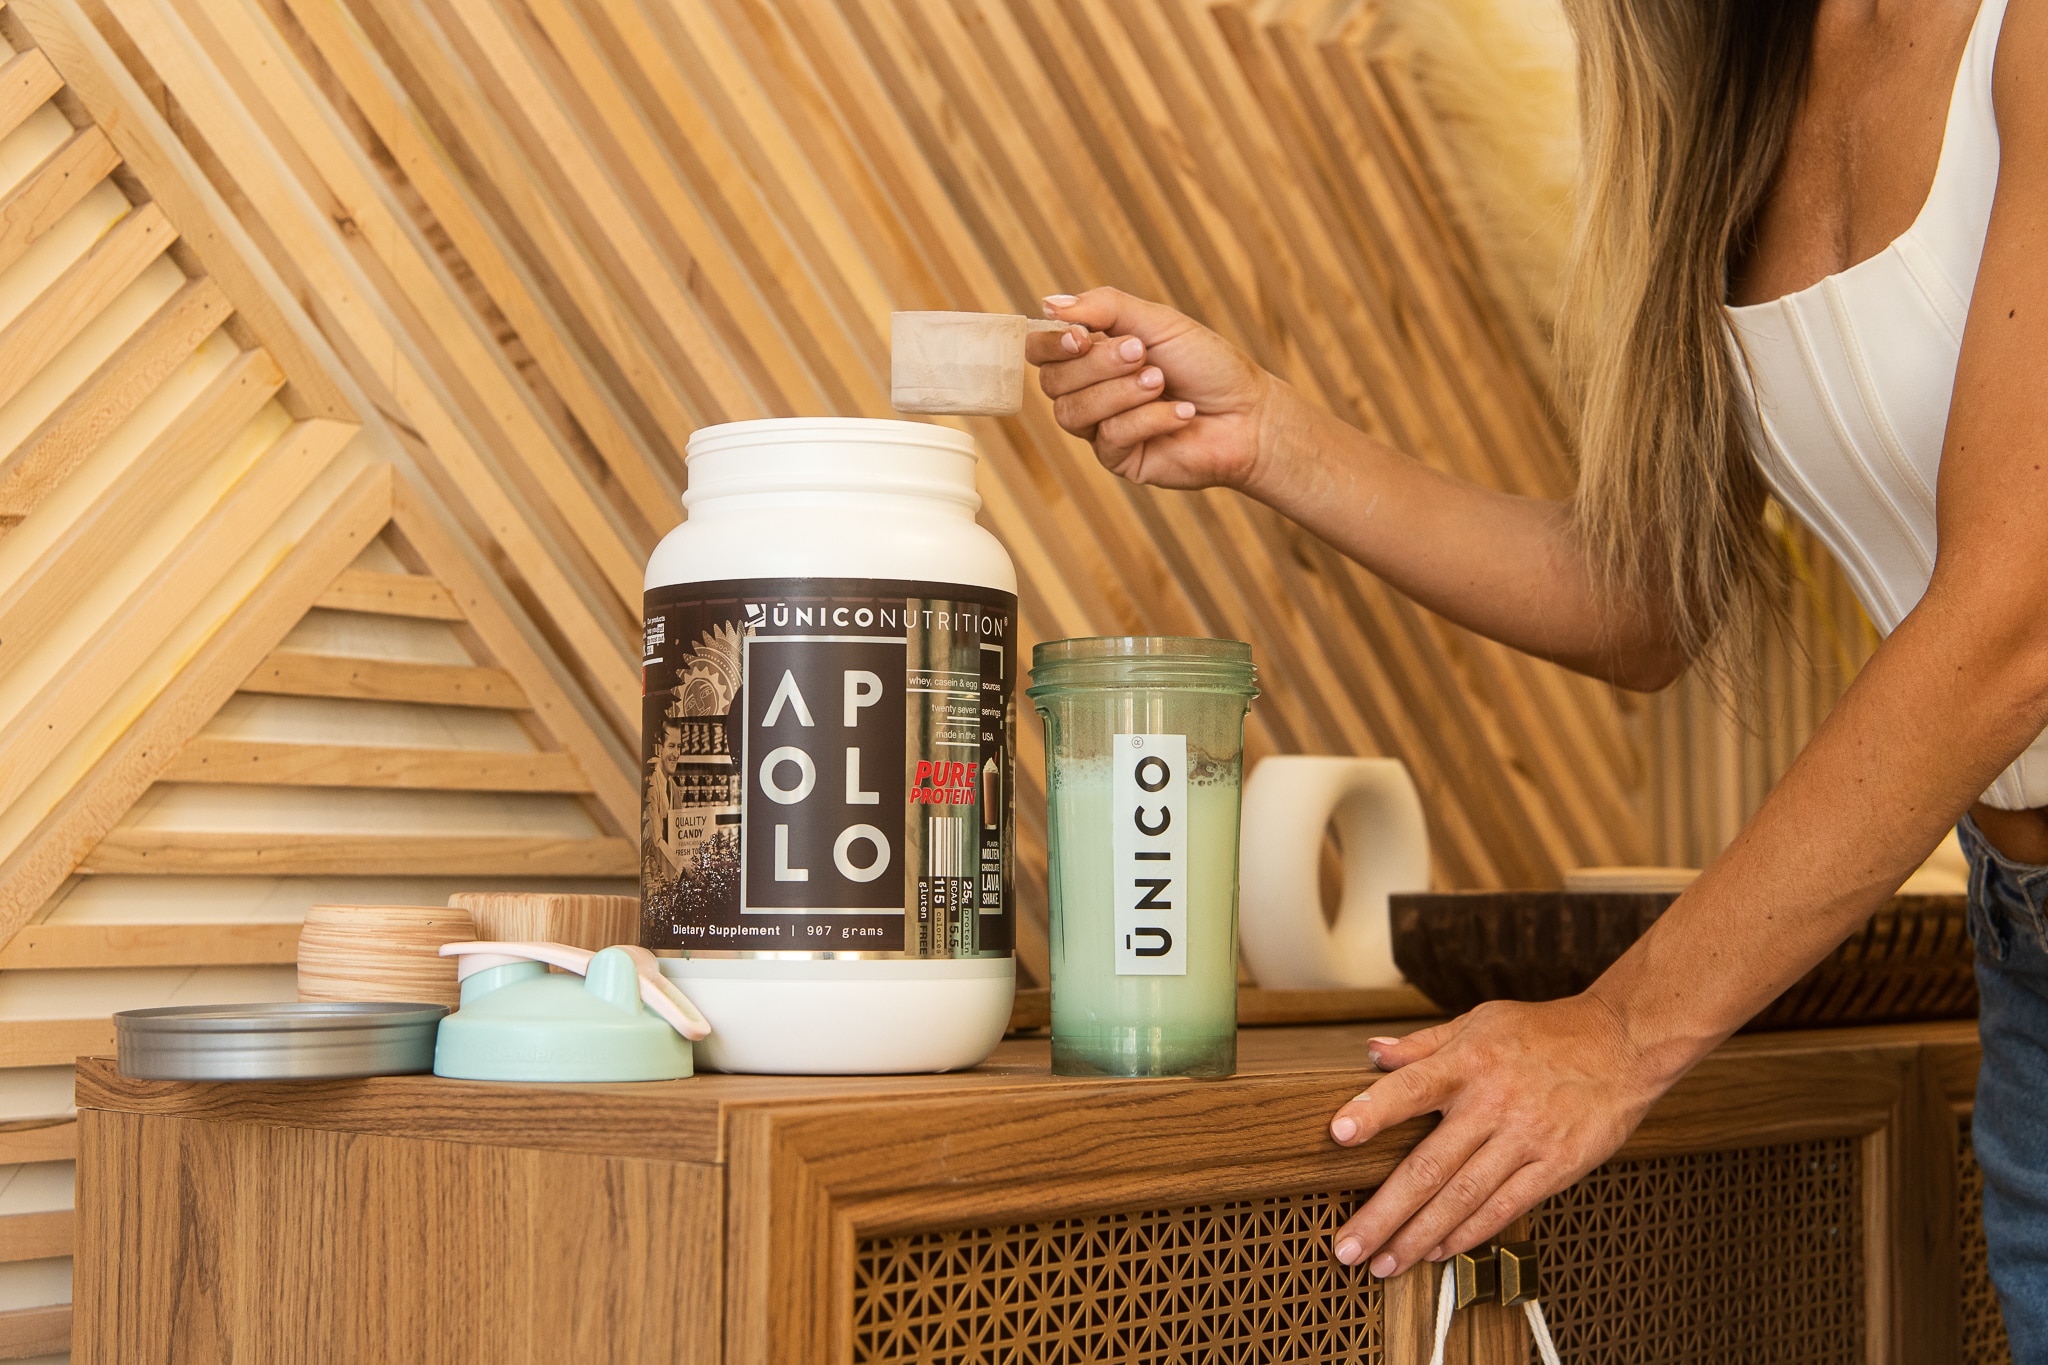 woman scooping protein powder out of a jar into a blue shaker bottle in front of artistic wooden paneling.